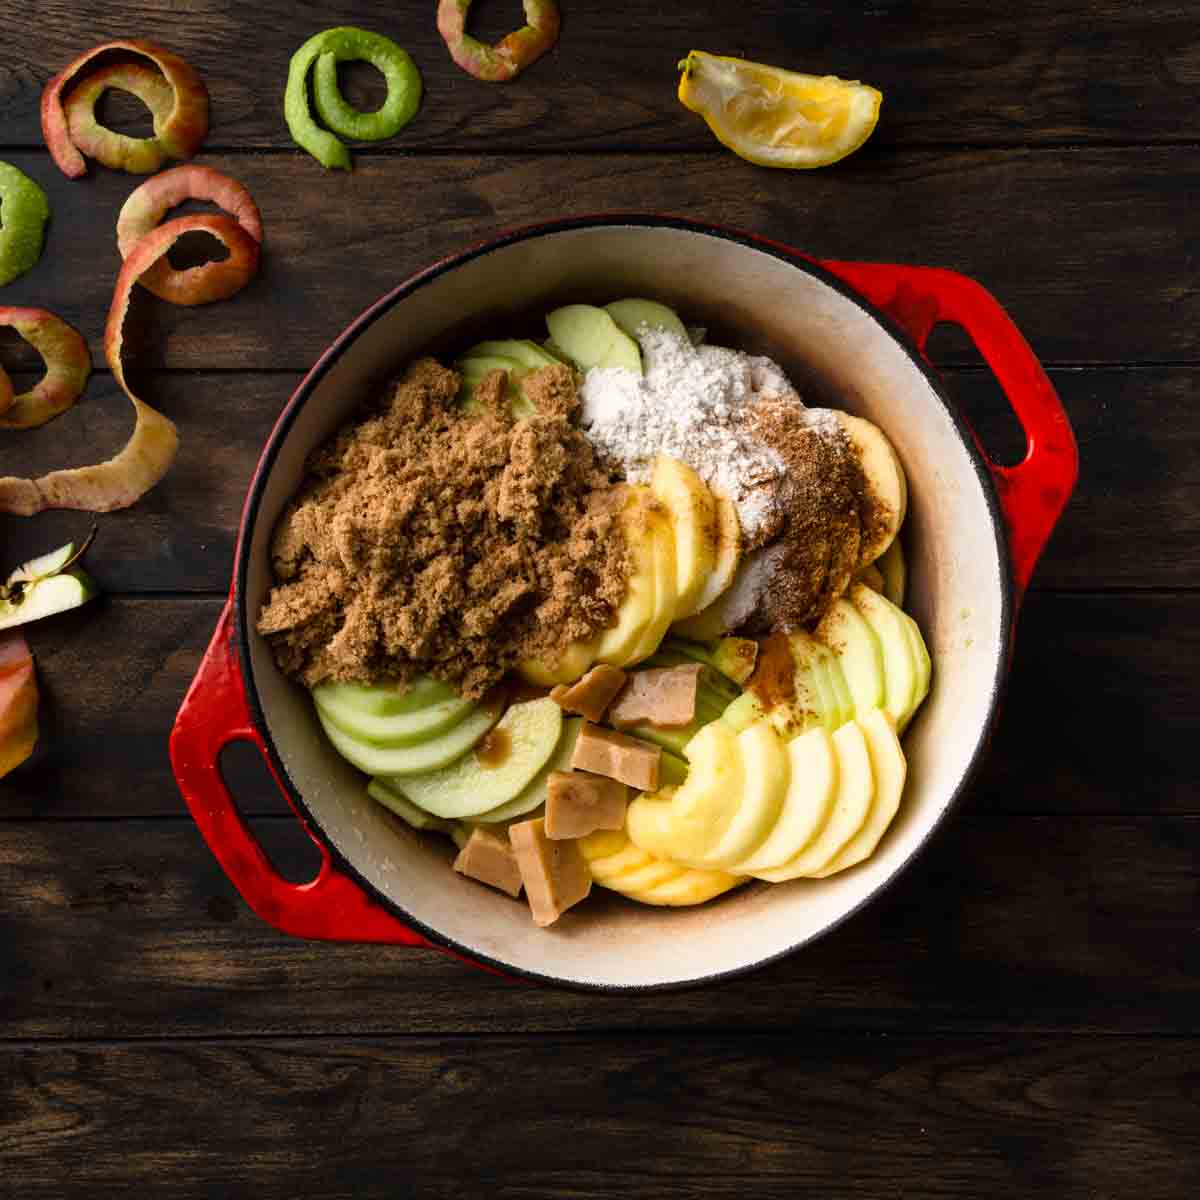 A red dutch oven filled with sliced apples and other ingredients for apple pie filling